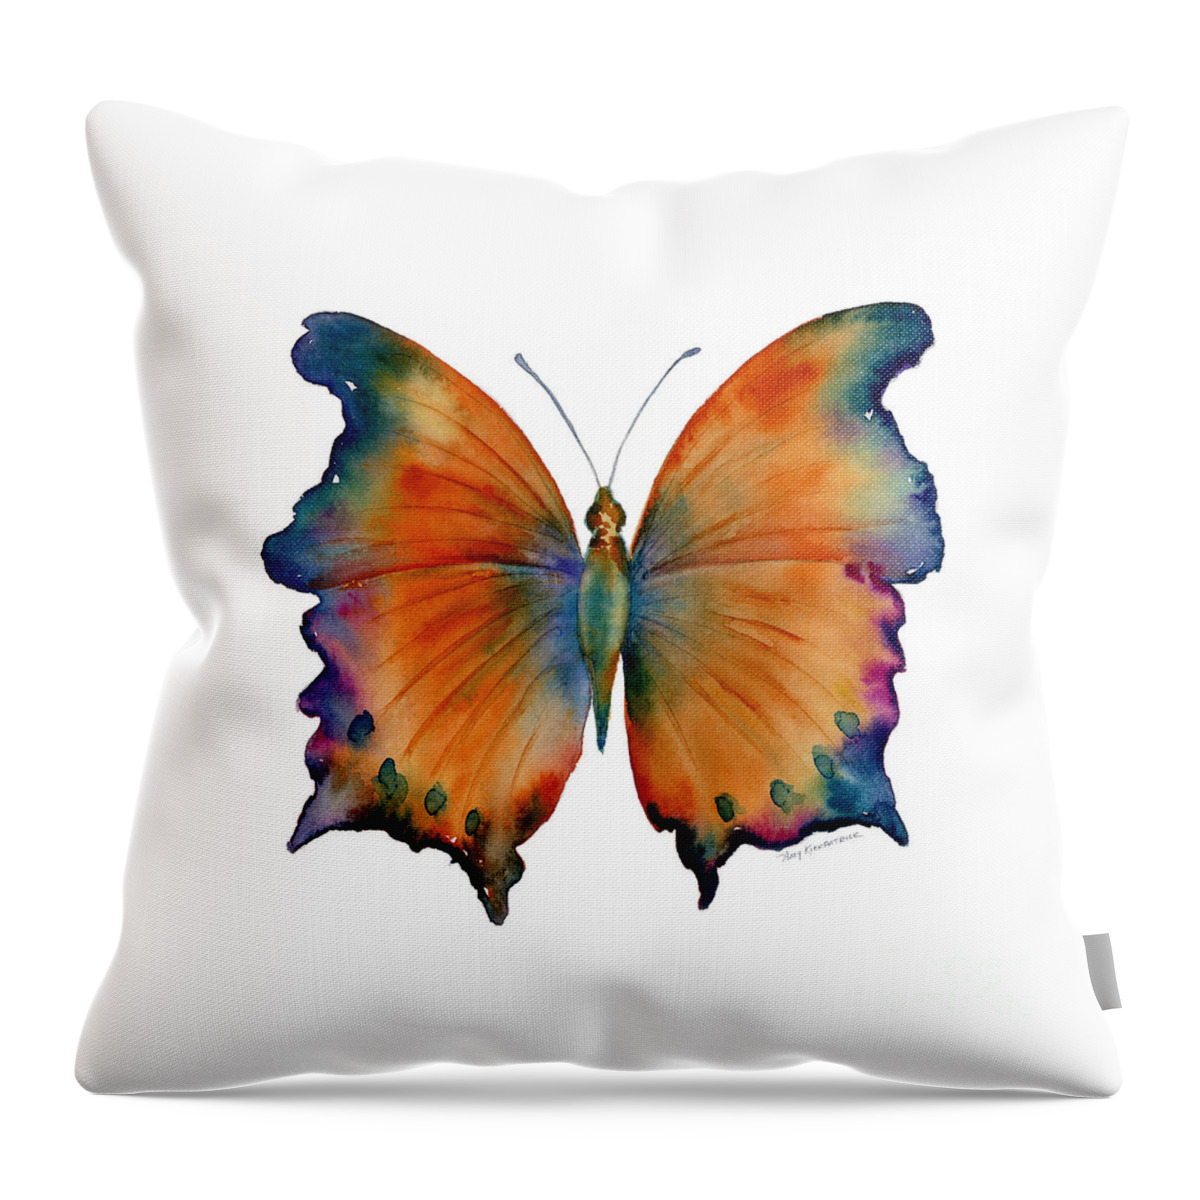 Wizard Butterfly Butterfly Butterflies Butterfly Print Butterfly Card Butterfly Cards Orange Orange And Blue Orange And Purple Orange Butterfly Nature Wings Winged Insect Nature Watercolor Butterflies Watercolor Butterfly Watercolor Moth Orange Butterfly Face Mask Throw Pillow featuring the painting 1 Wizard Butterfly by Amy Kirkpatrick